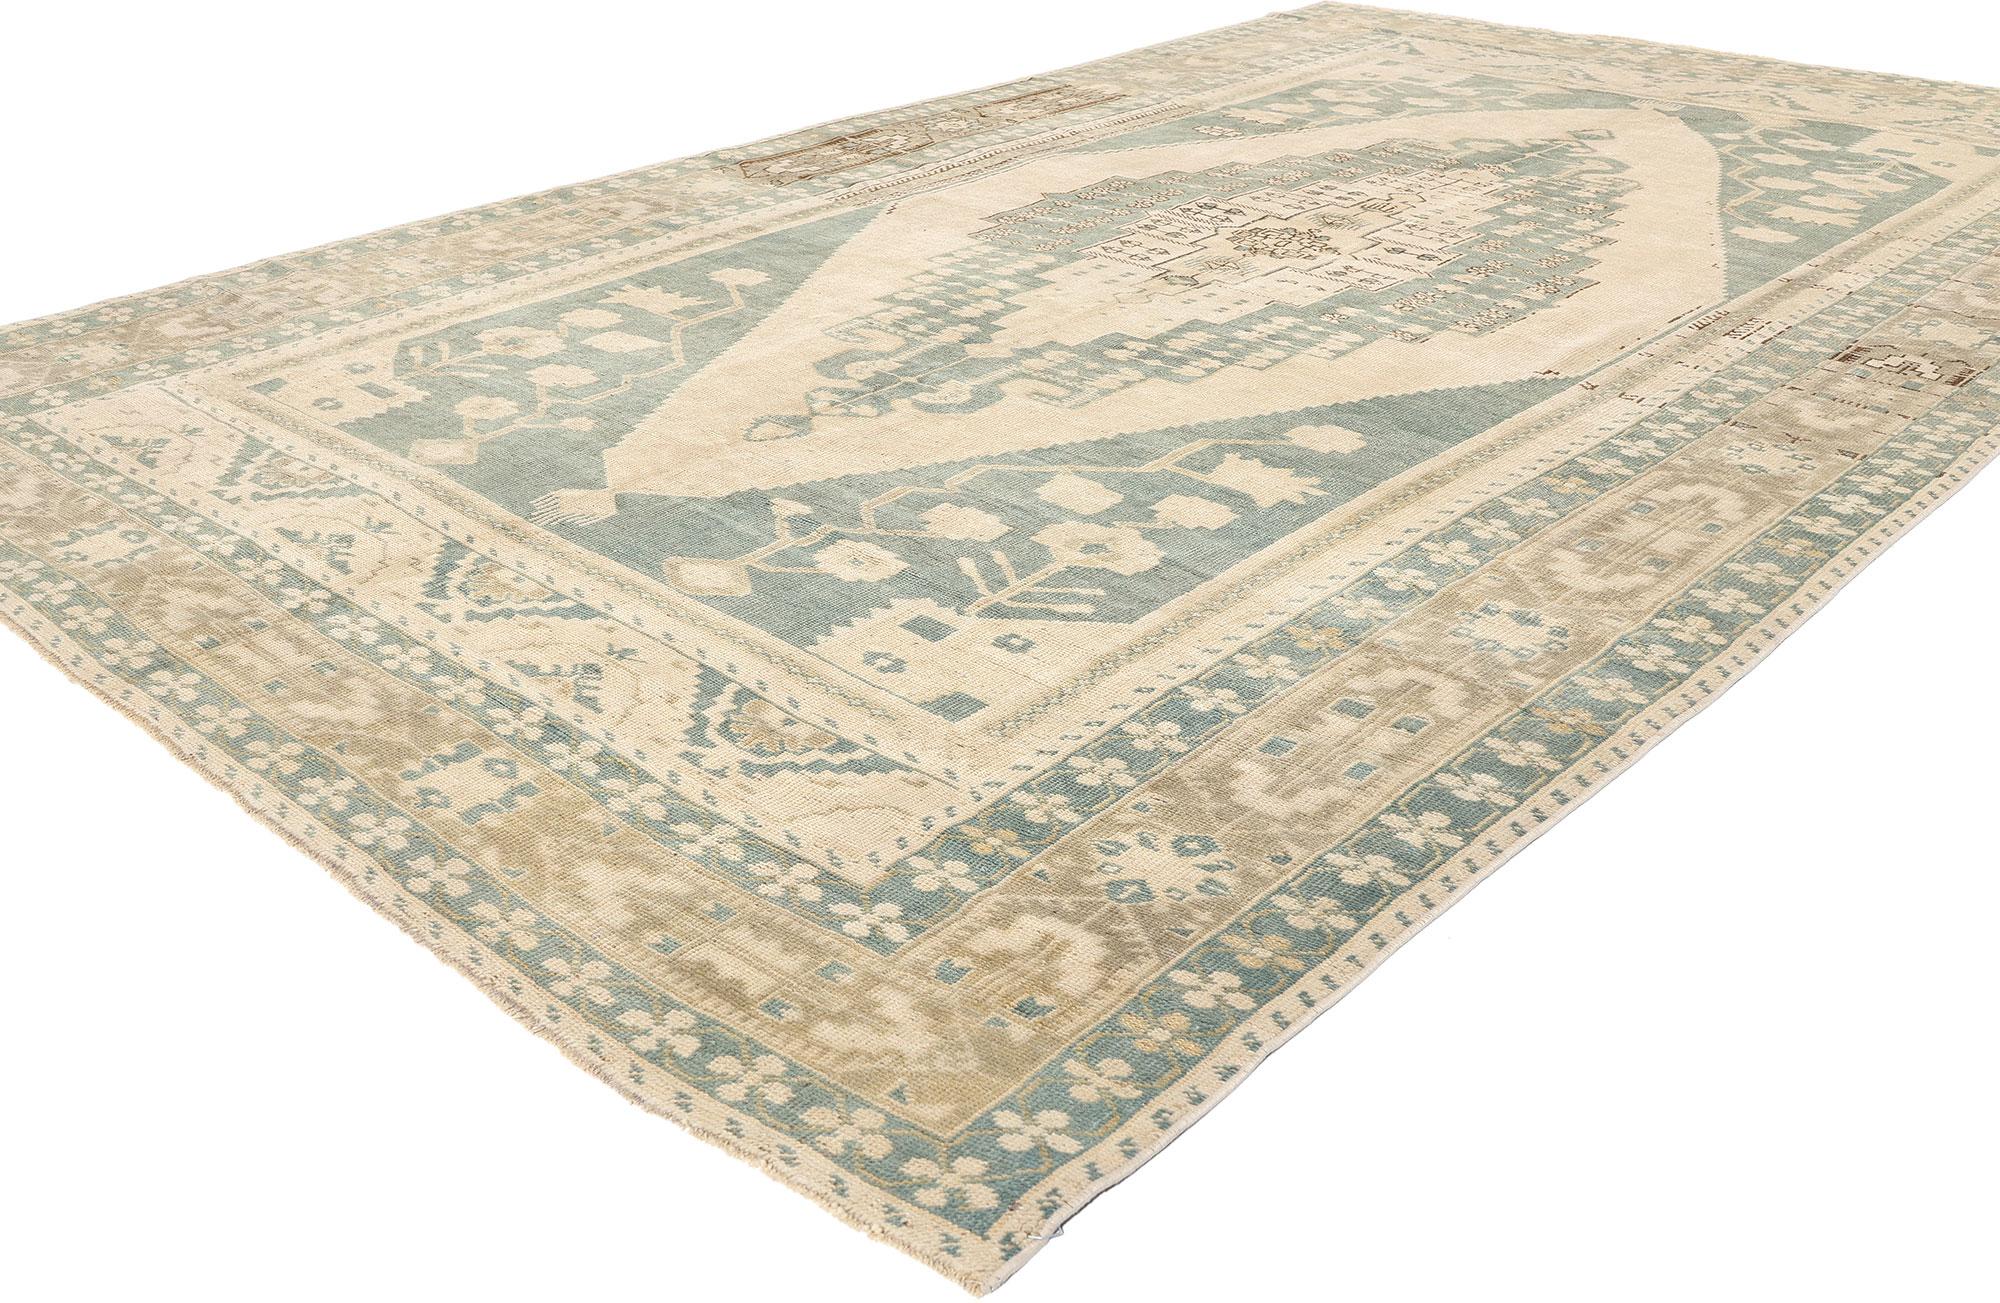 53681 Vintage Green Turkish Oushak Rug, 06'08 x 11'01. Antique-washed Turkish Oushak rugs are a type of traditional rug originating from the Oushak region in western Turkey that undergoes a specialized washing process to achieve an antique or